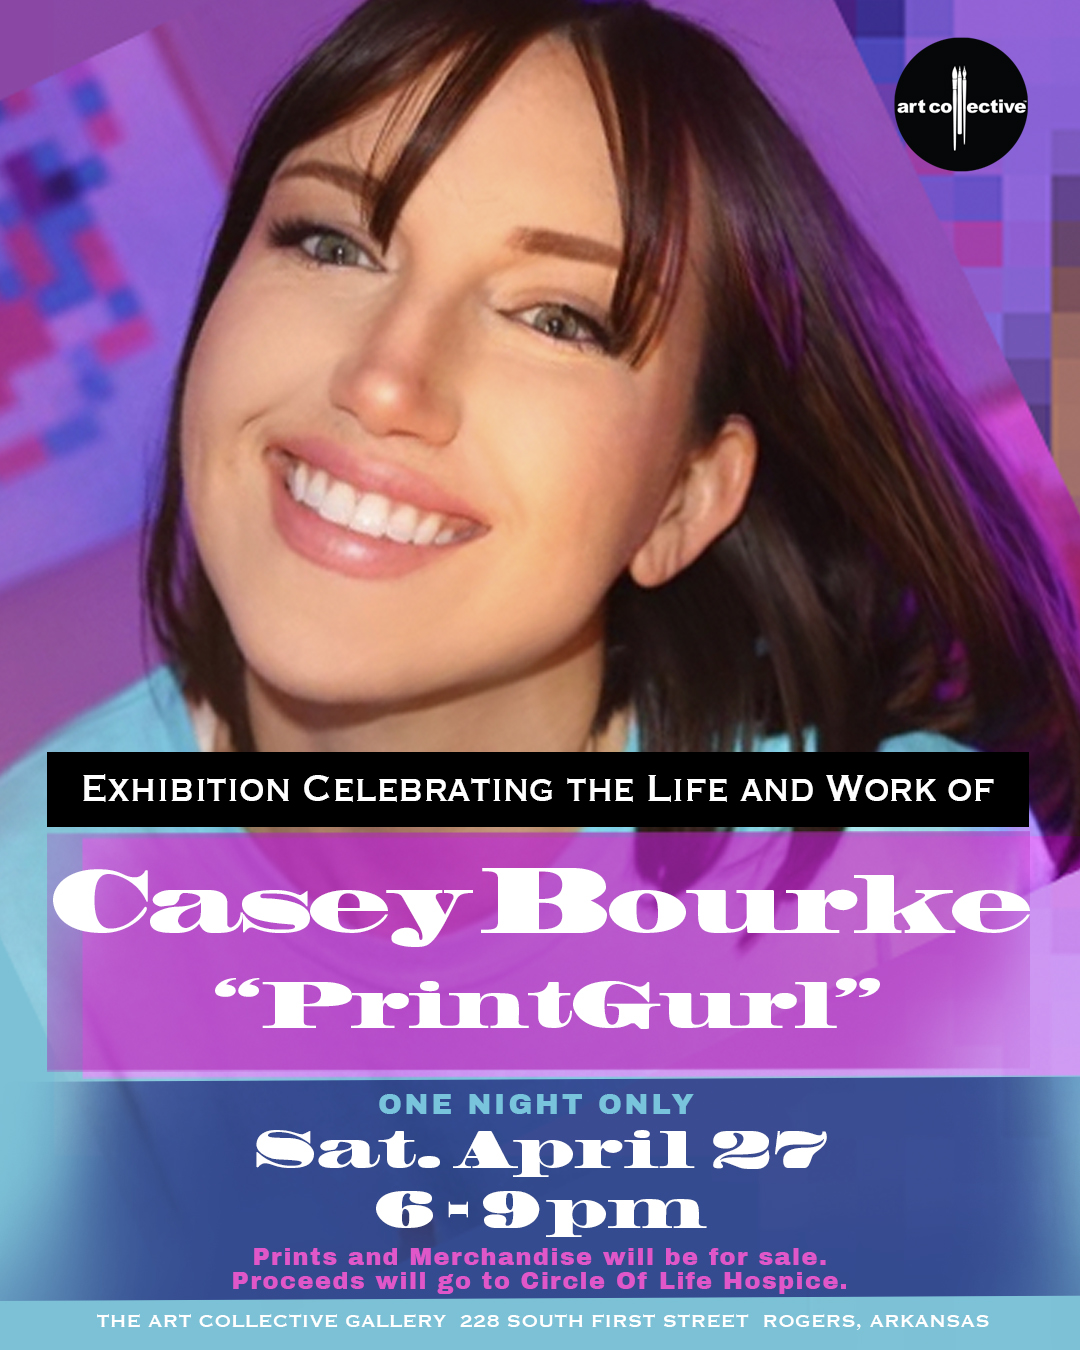 Celebrating the Life and Work of Casey Bourke “PrintGurl”